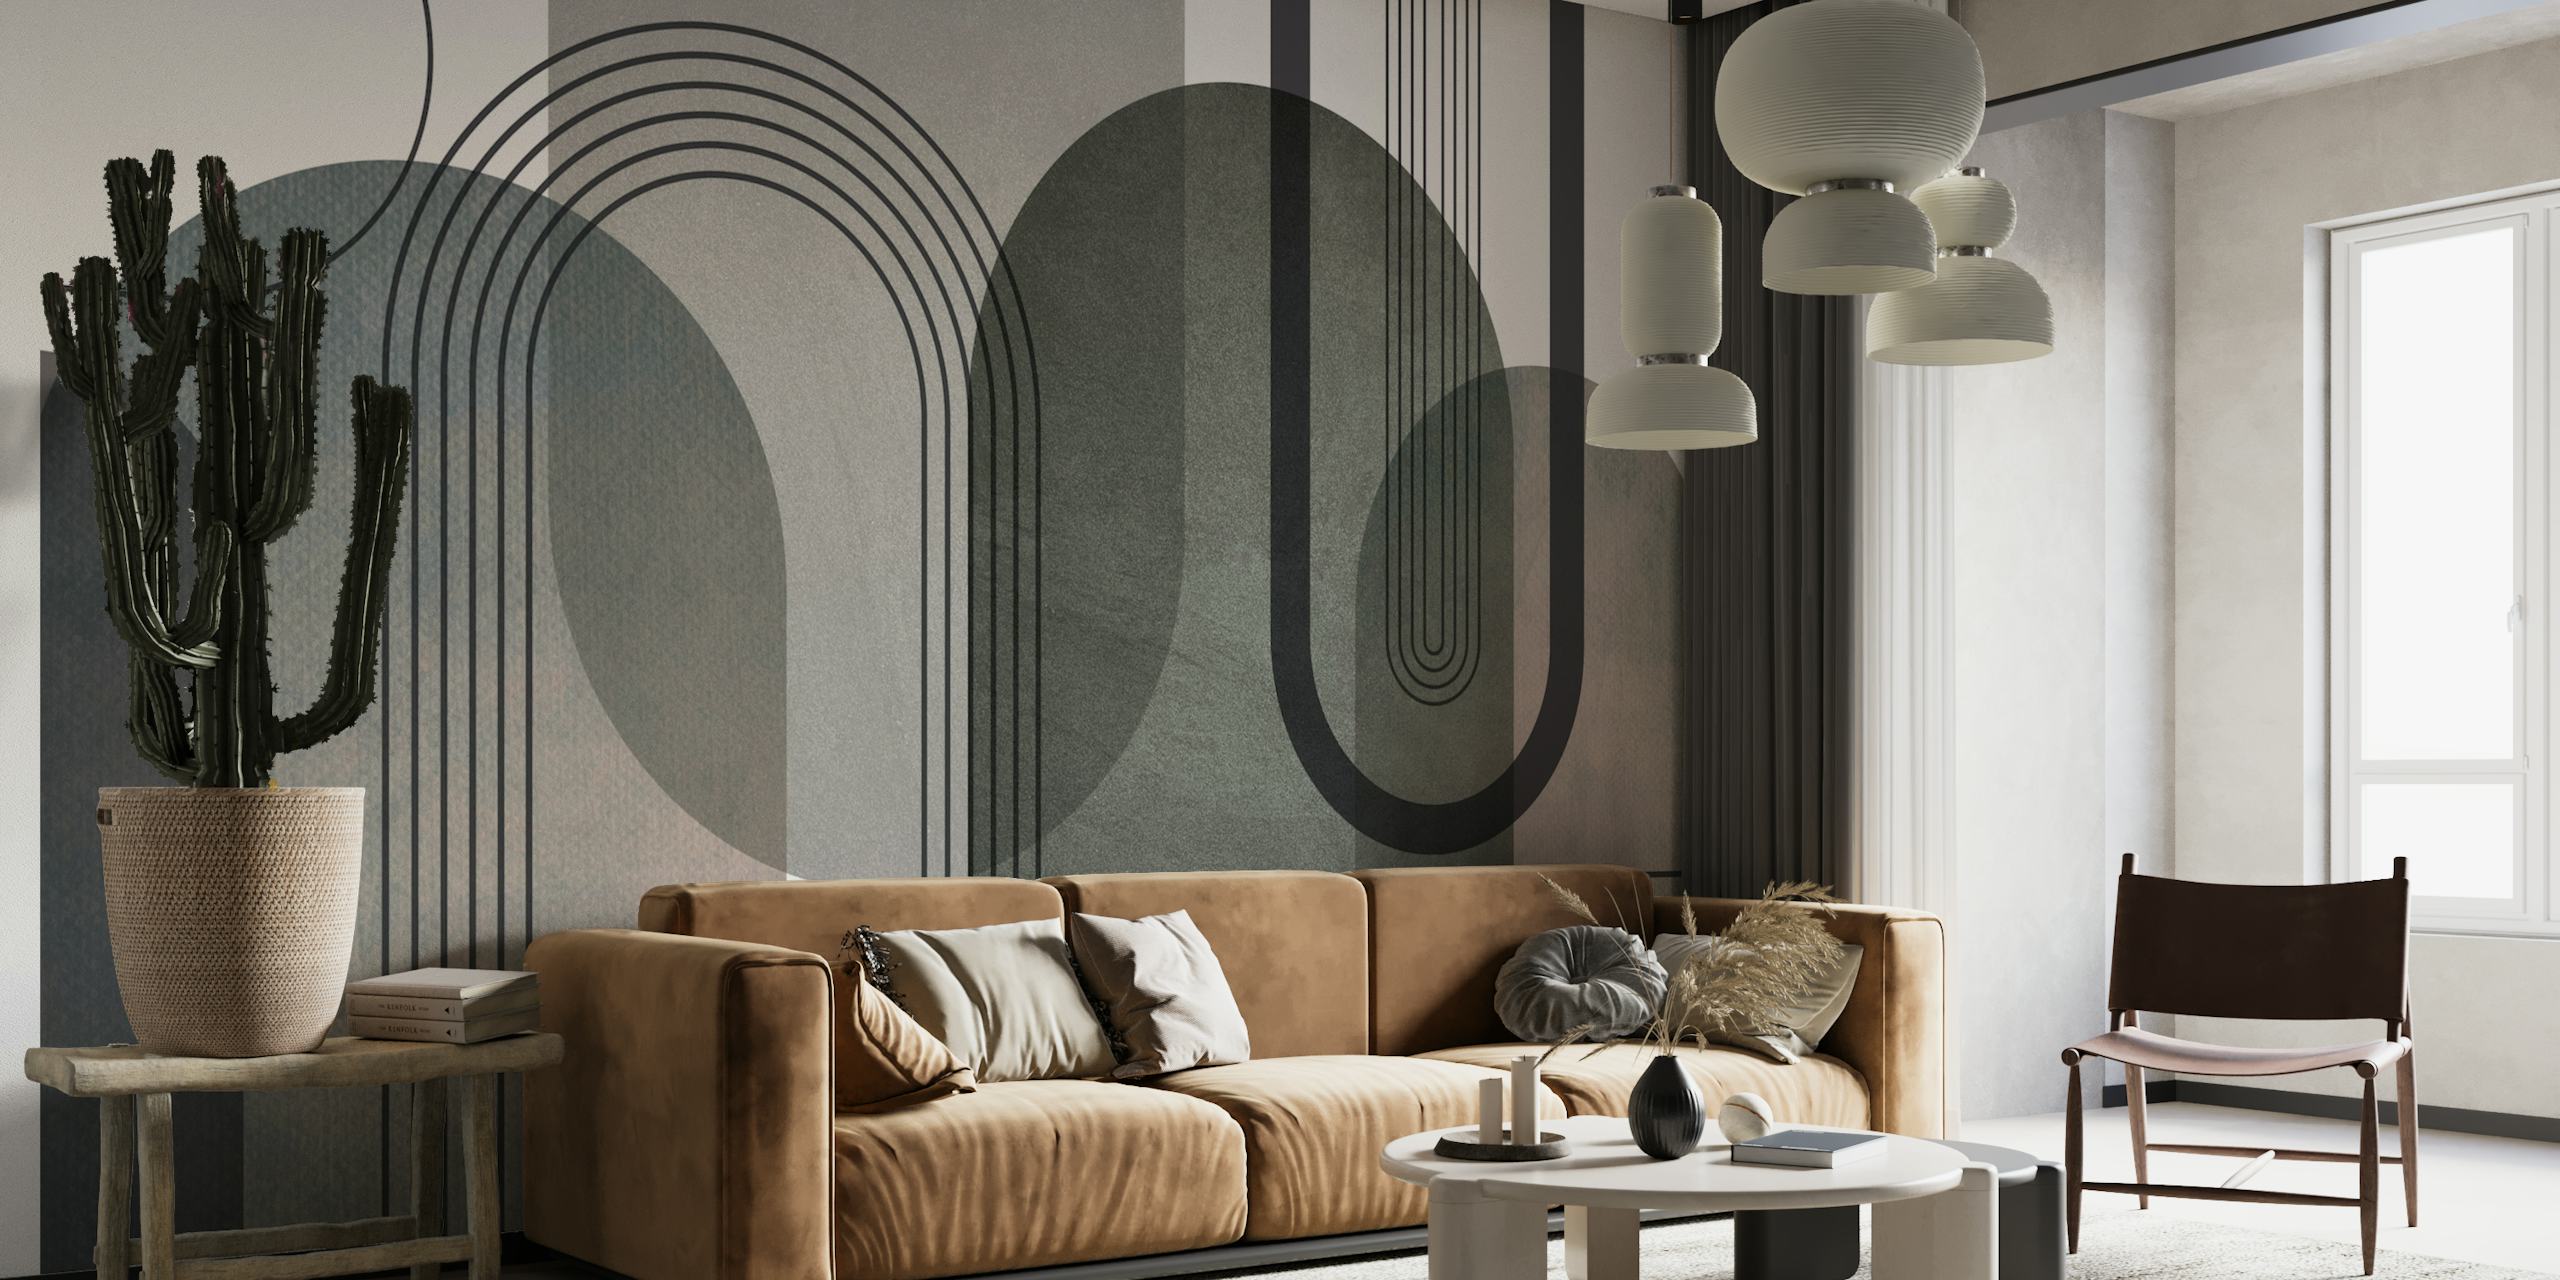 Abstract Arches in Muted Tones wallpaper